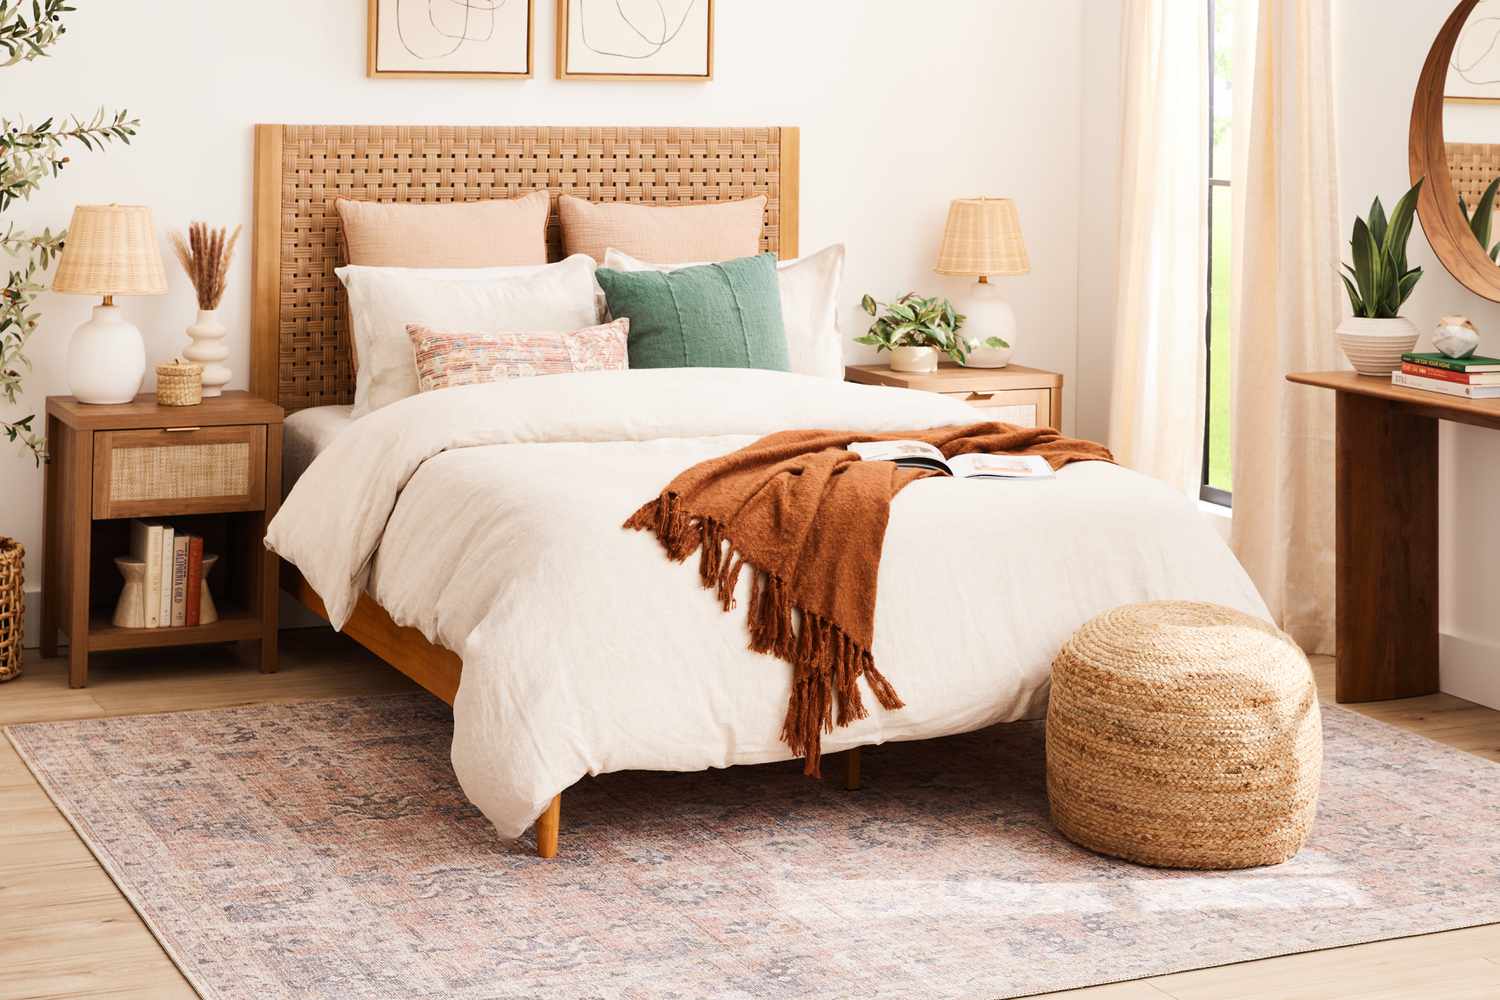 Steps to Find the Best Rug Size for a King Bed